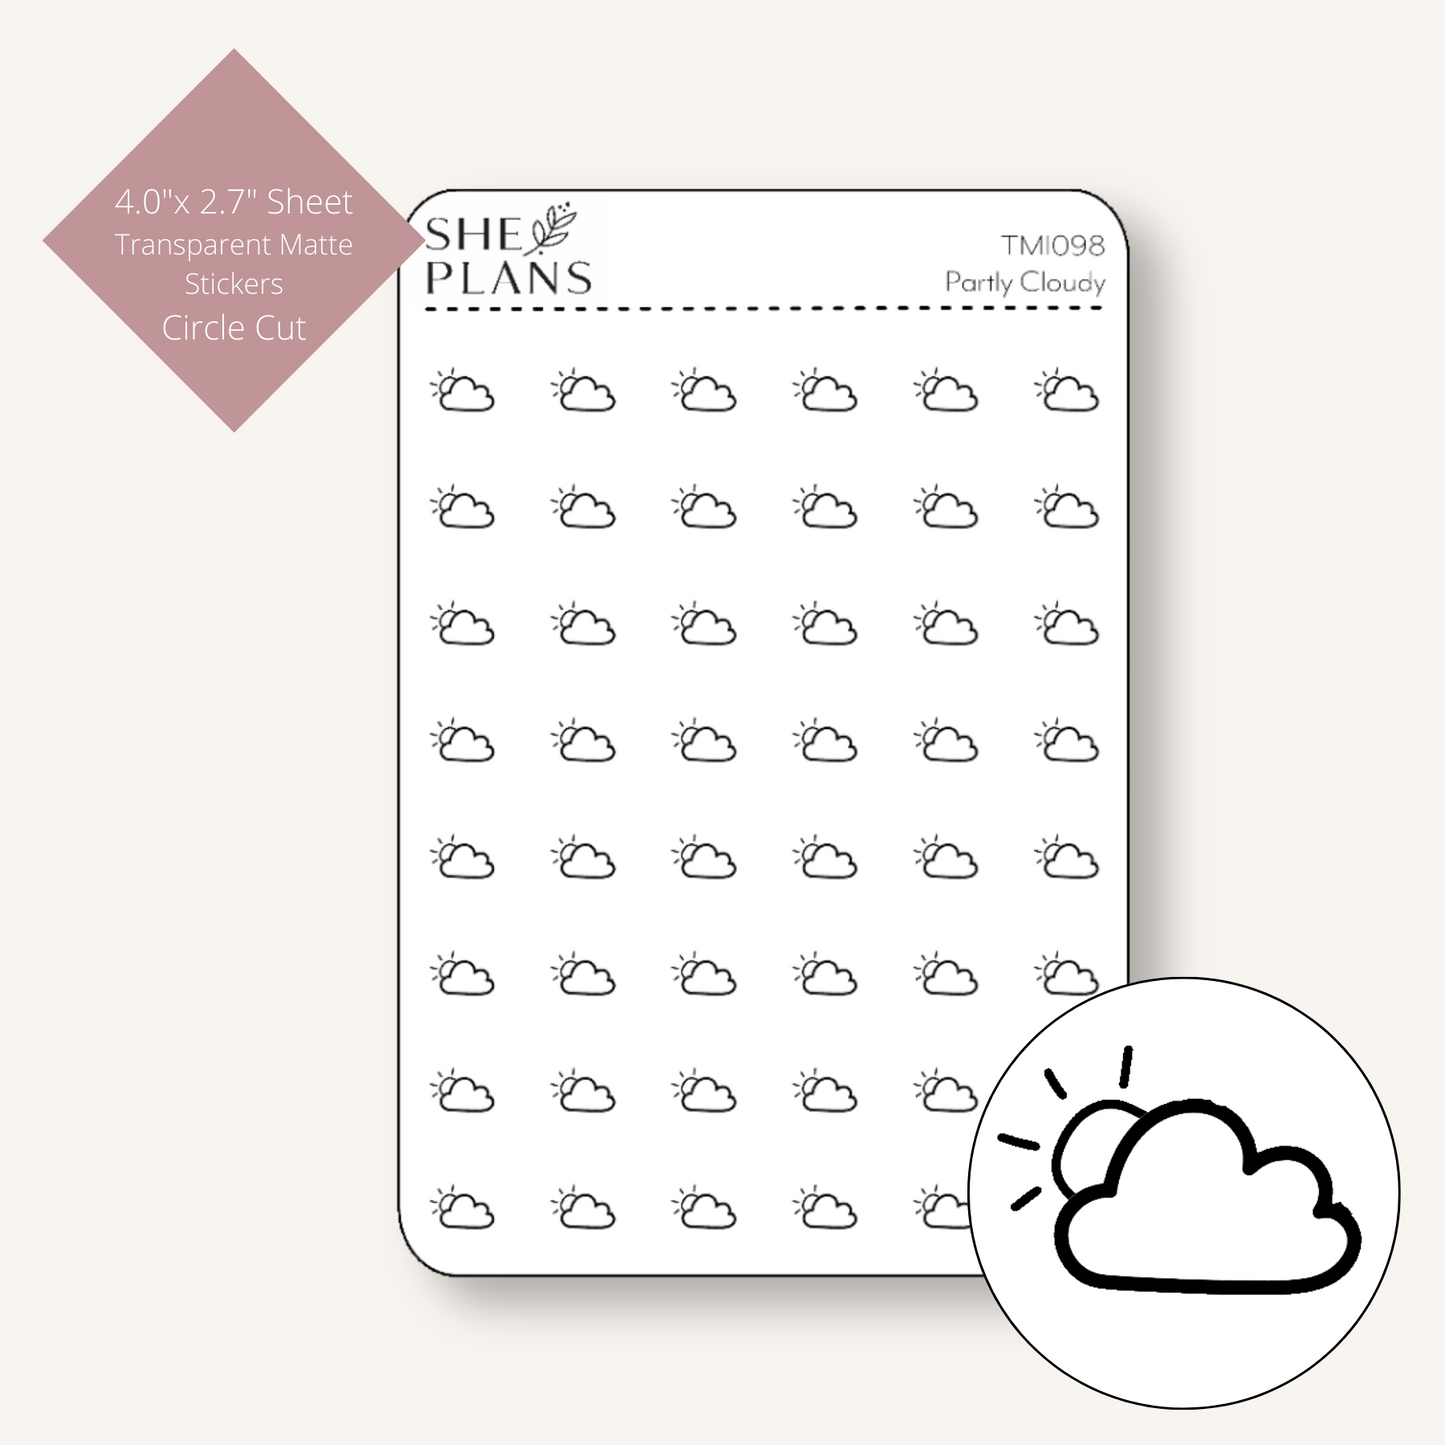 Partly Cloudy Icon Sticker 